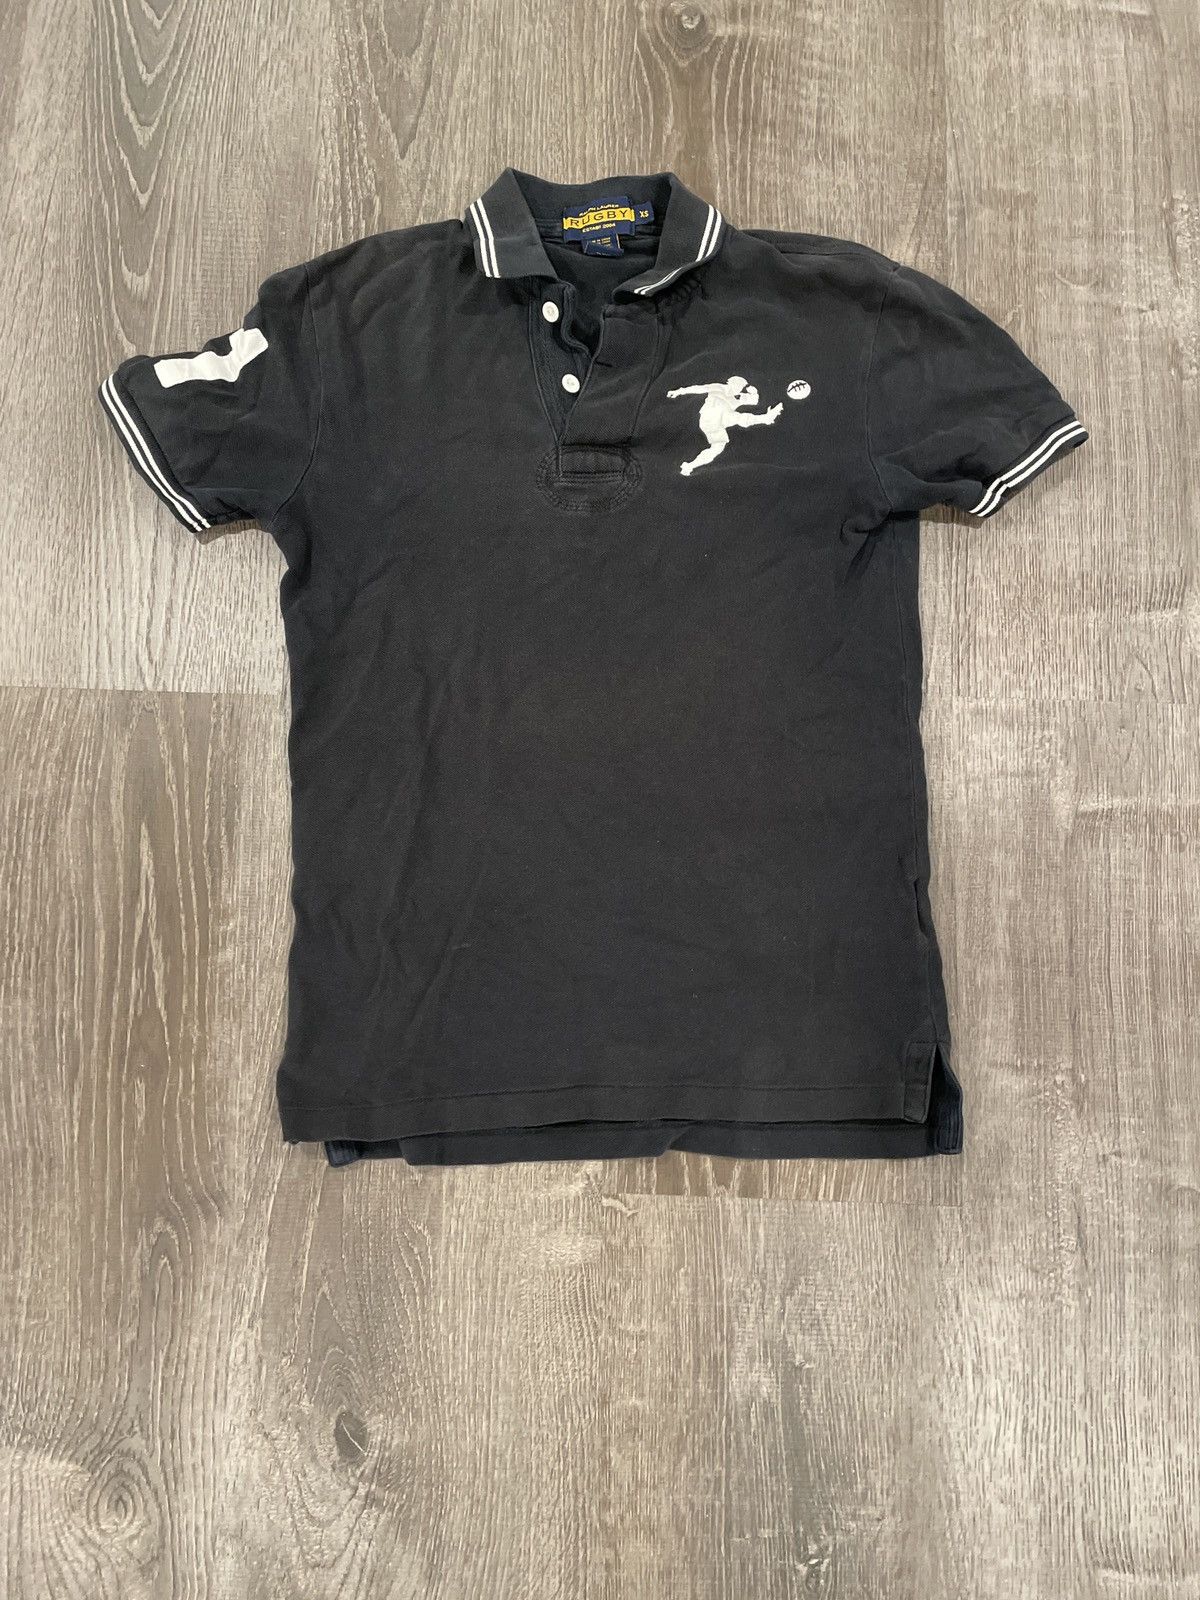 Ralph Lauren Rugby Rugby Polo Size US XS / EU 42 / 0 - 1 Preview